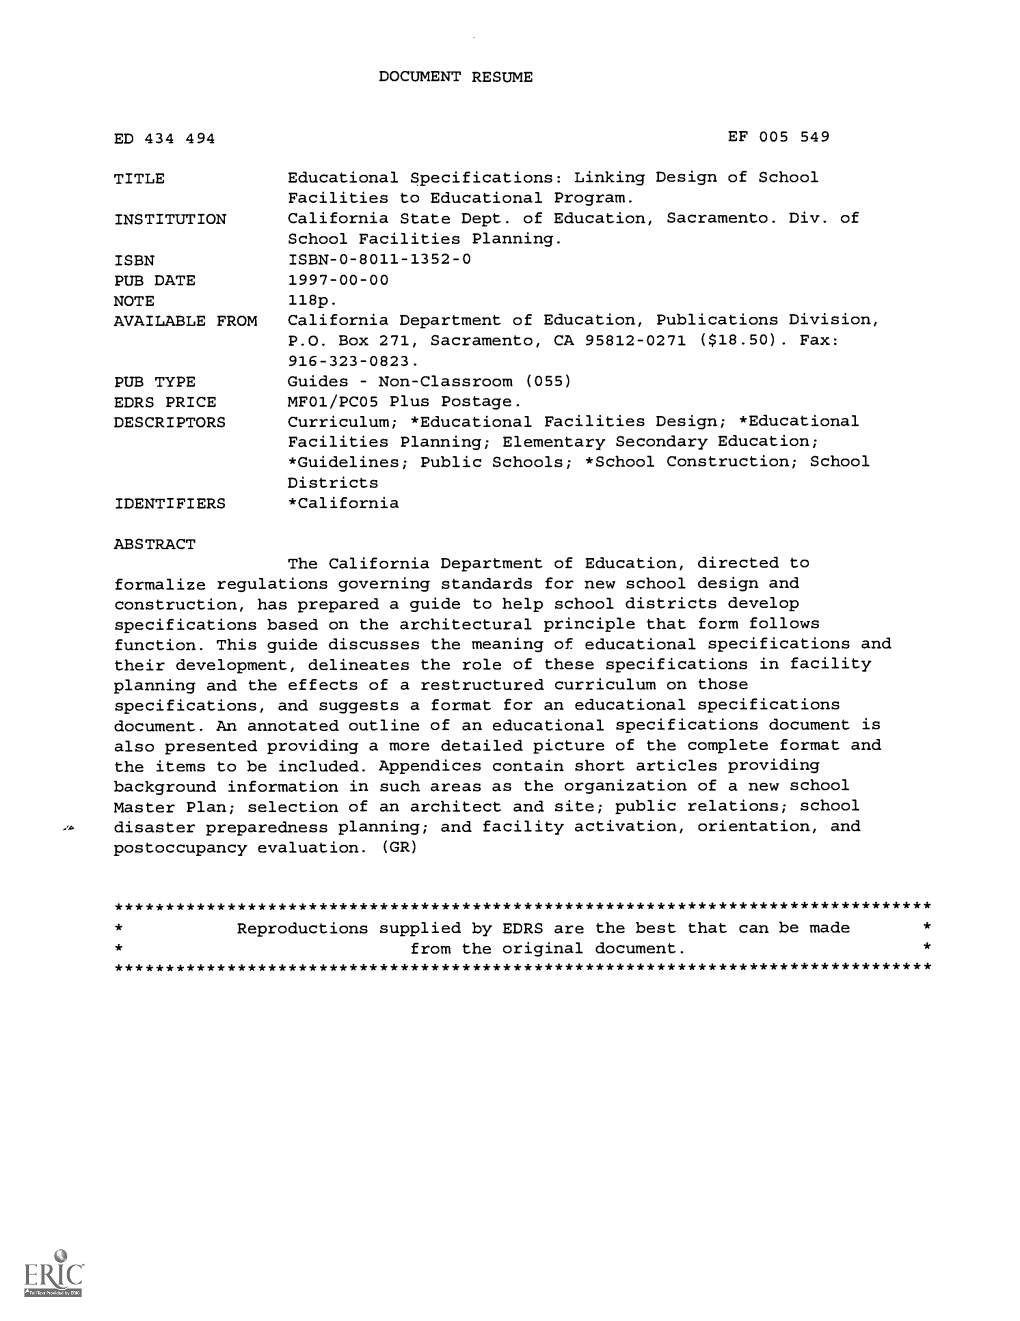 DOCUMENT RESUME Educational Specifications: Linking Design Of